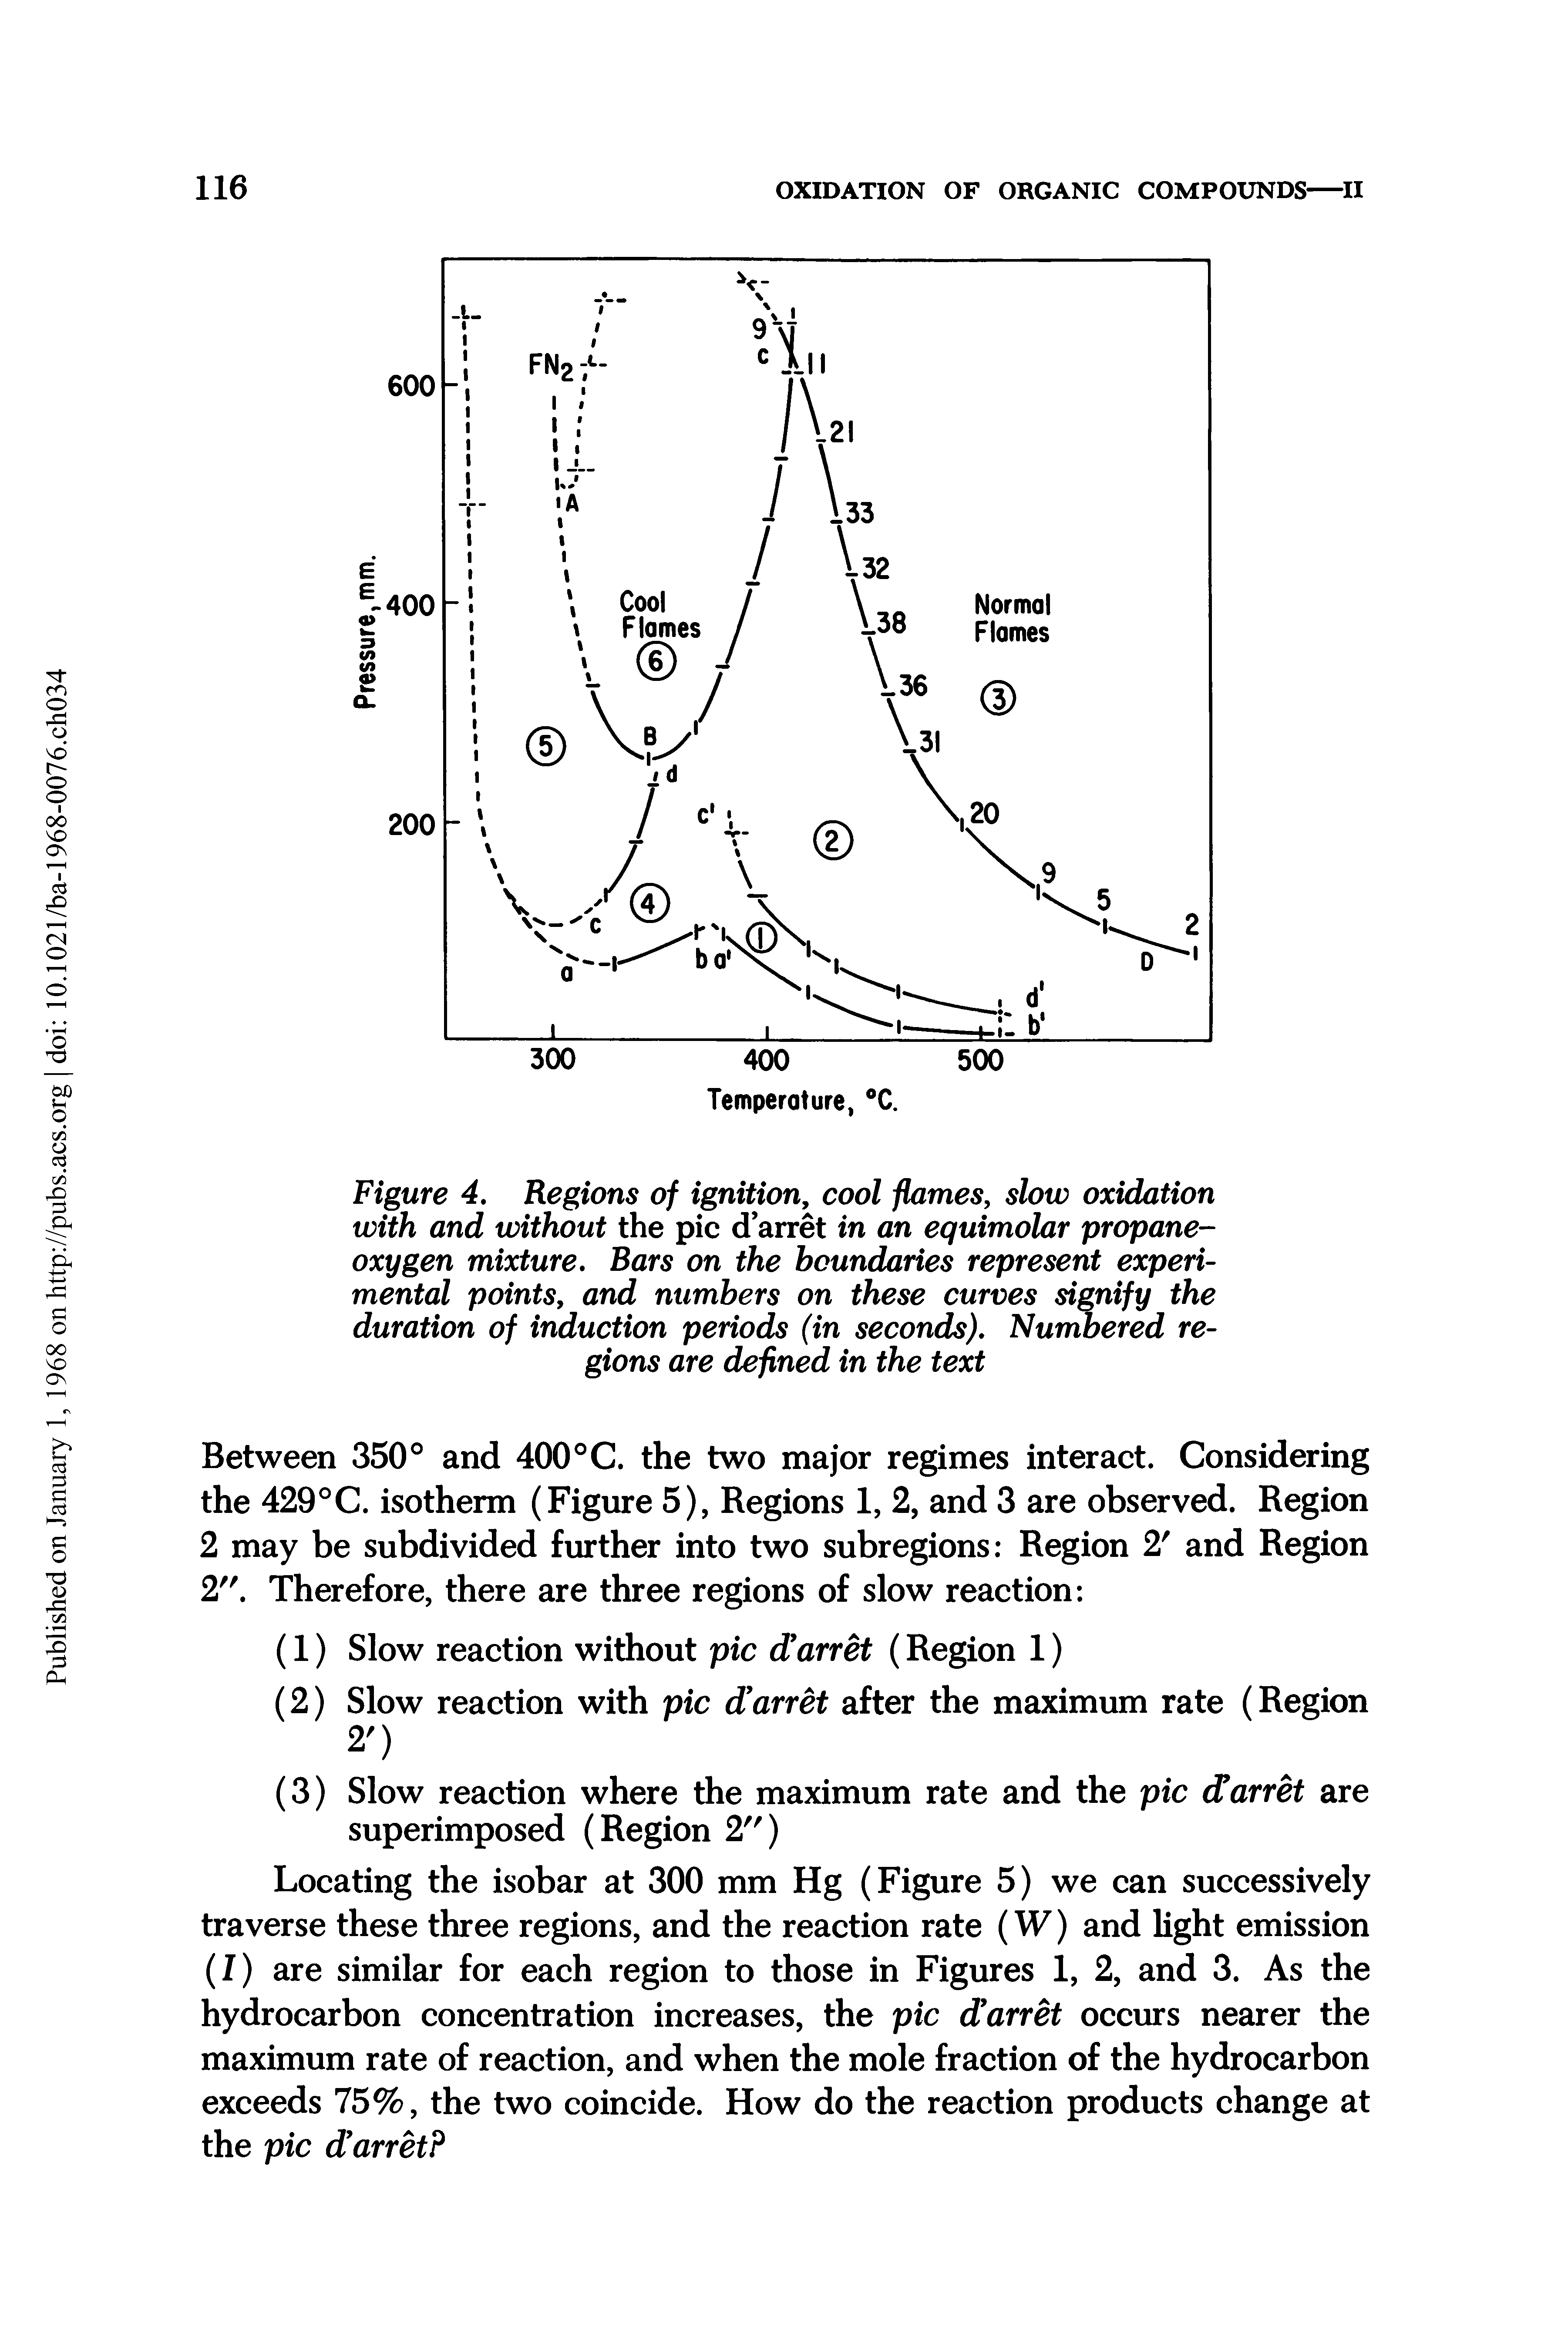 Figure 4. Regions of ignition, cool flames, slow oxidation with and without the pic darret in an equimolar propane-oxygen mixture. Bars on the boundaries represent experimental points, and numbers on these curves signify the duration of induction periods (in seconds). Numbered regions are defined in the text...